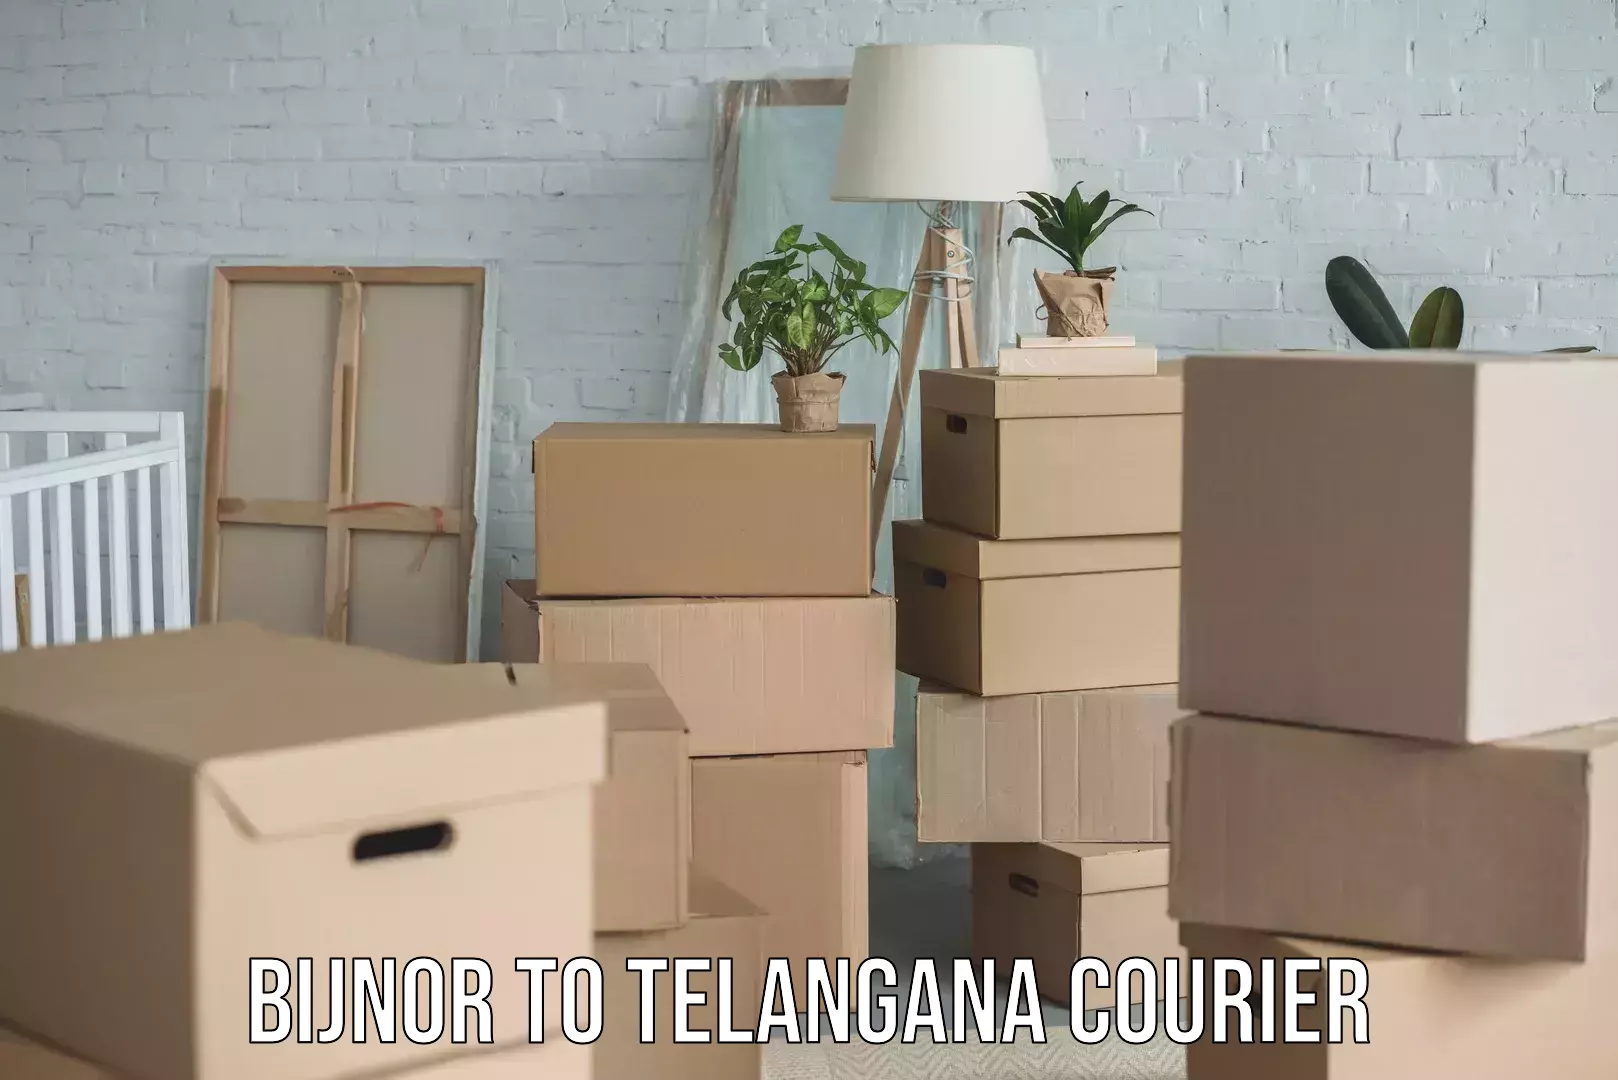 End-to-end delivery Bijnor to Telangana